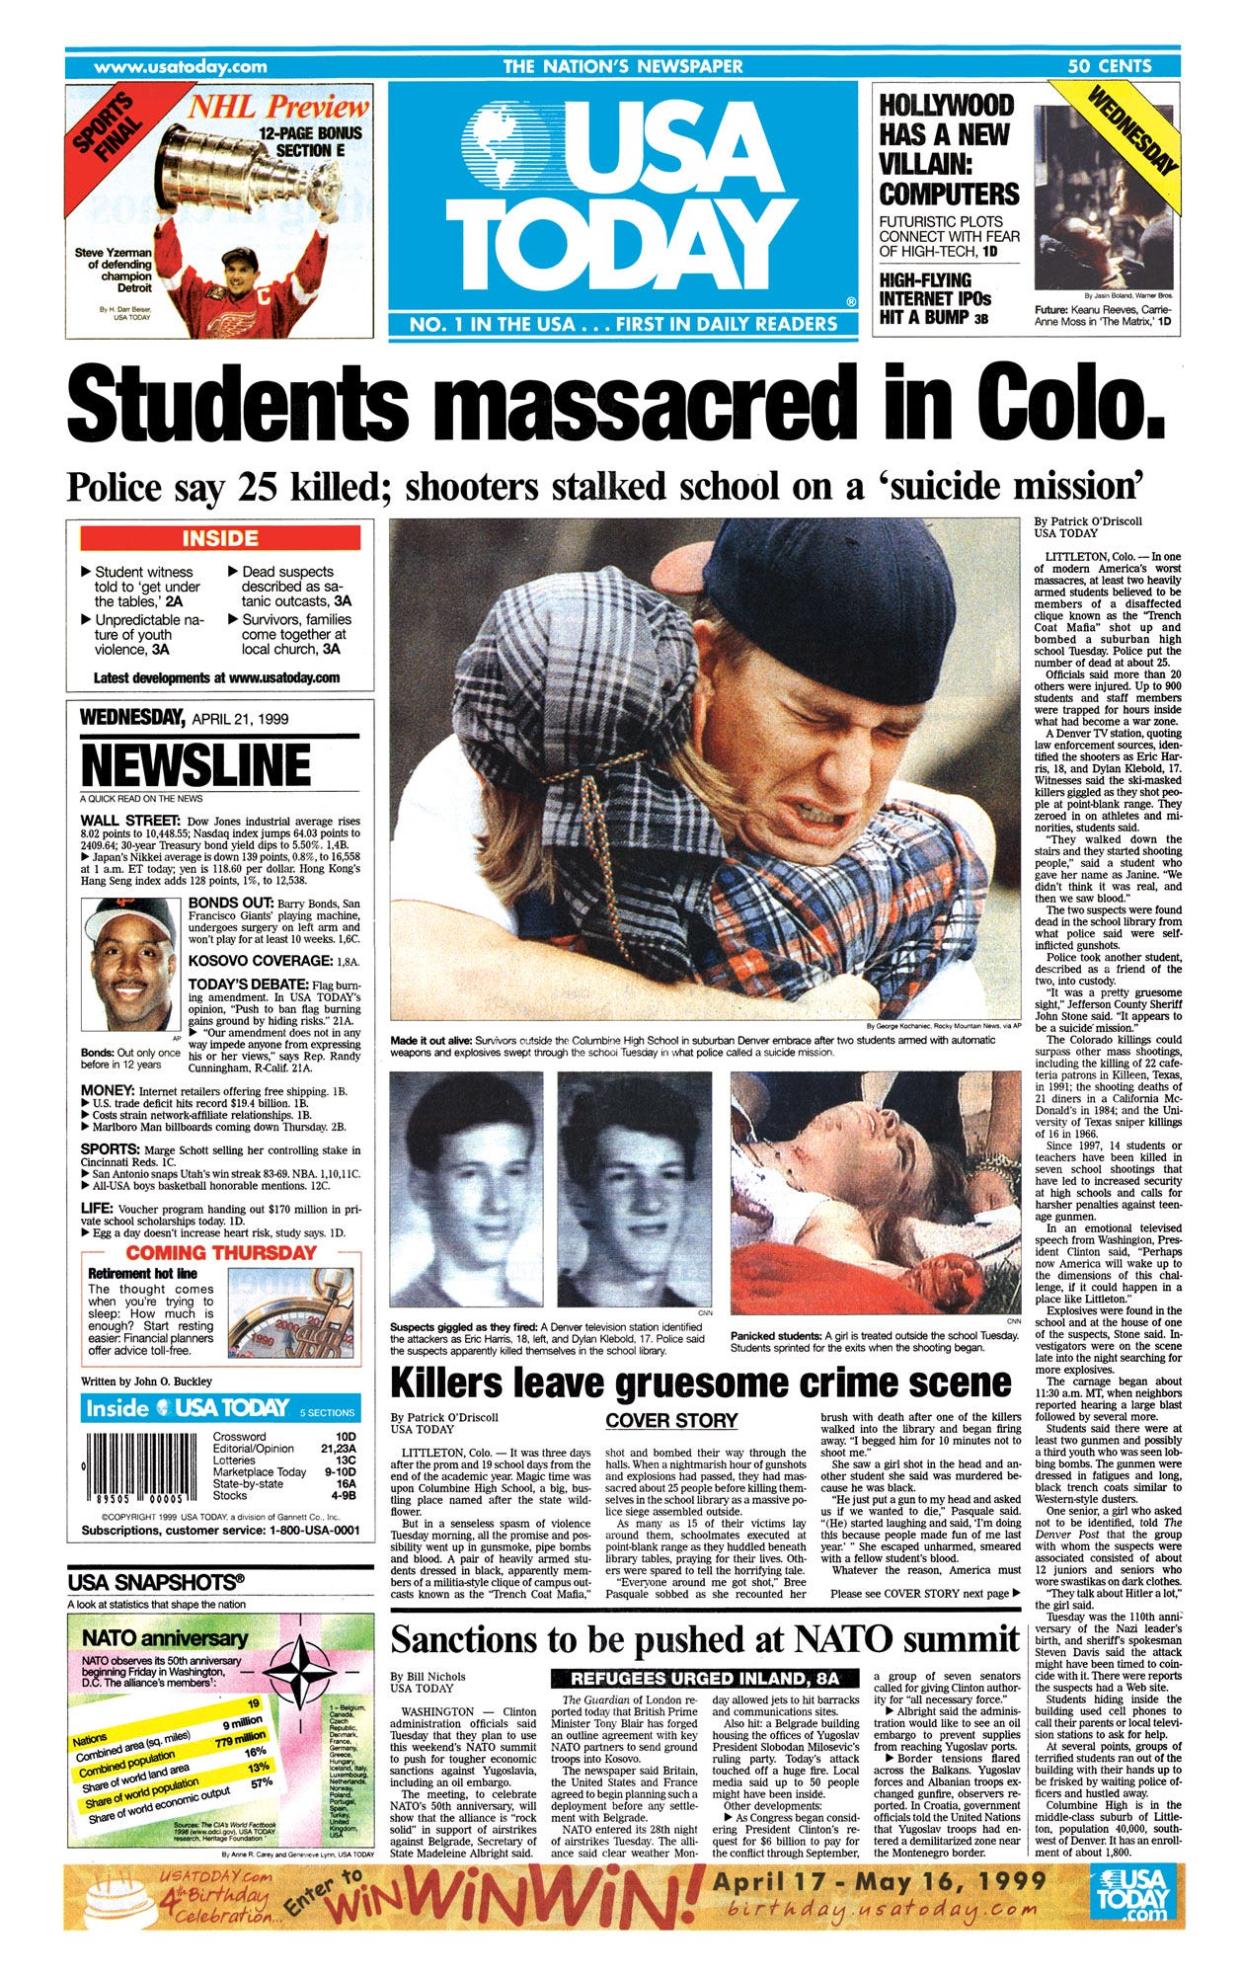 USA TODAY front page from April 21, 1999 detailing the massacre at Columbine High School. Early reports put the death toll higher, but 12 students and a teacher were killed that day.